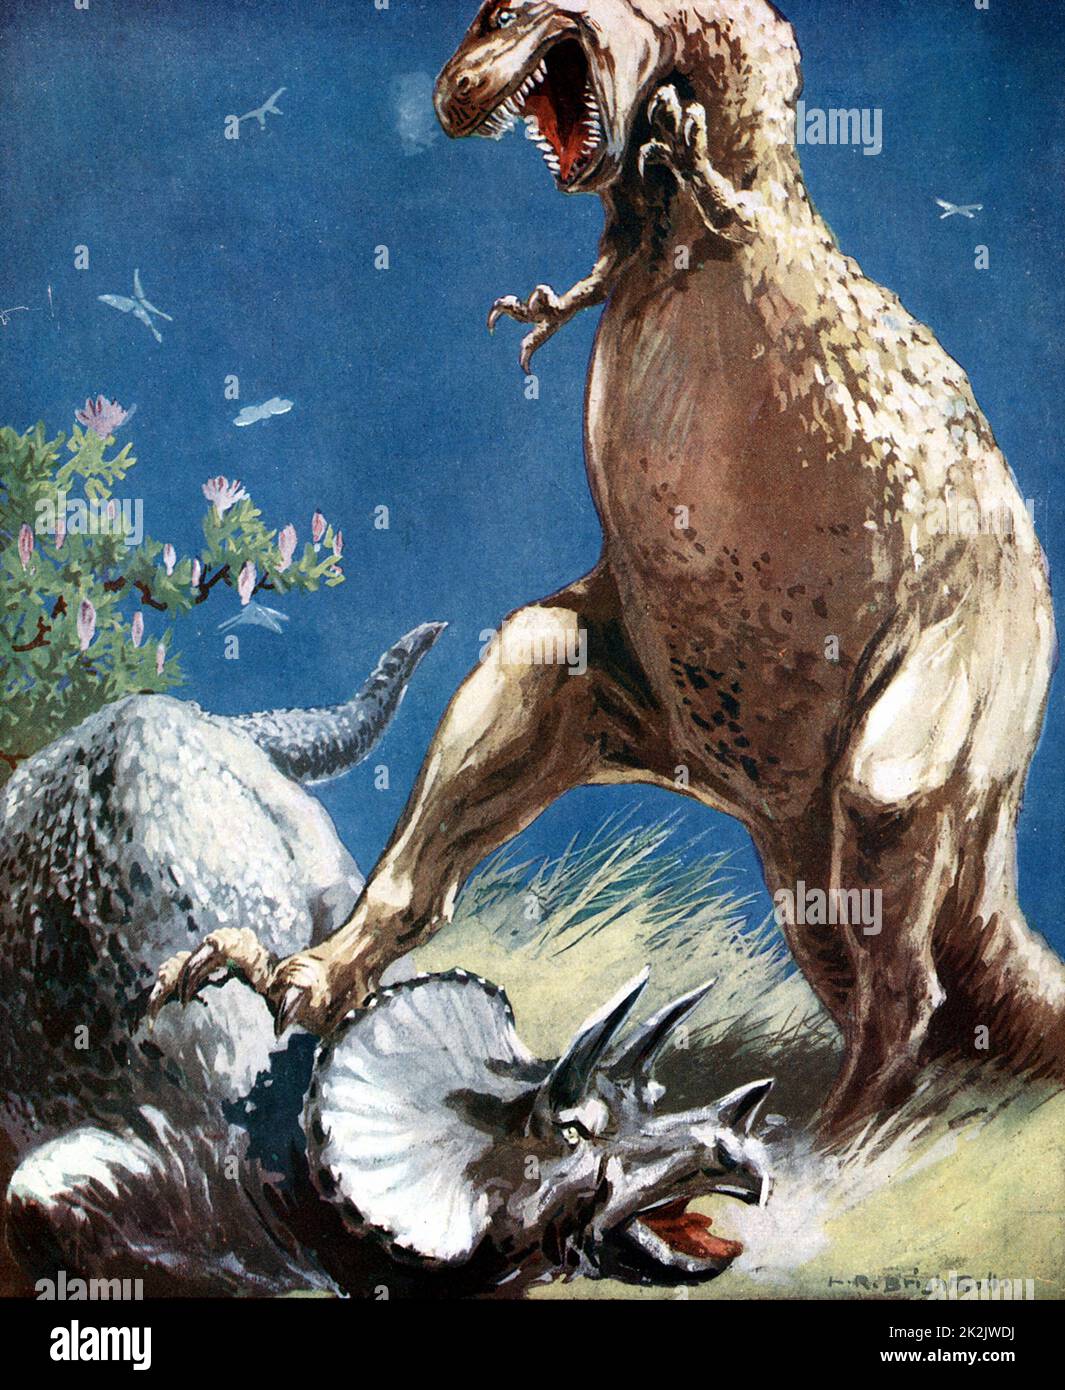 Triceratops, a horned dinosaur, held down by Tyrannosaur. Artist's reconstruction of fight between two giant reptiles of the Mesozoic Era (225,000,000 -65,000,000 years ago) published c1920 Stock Photo